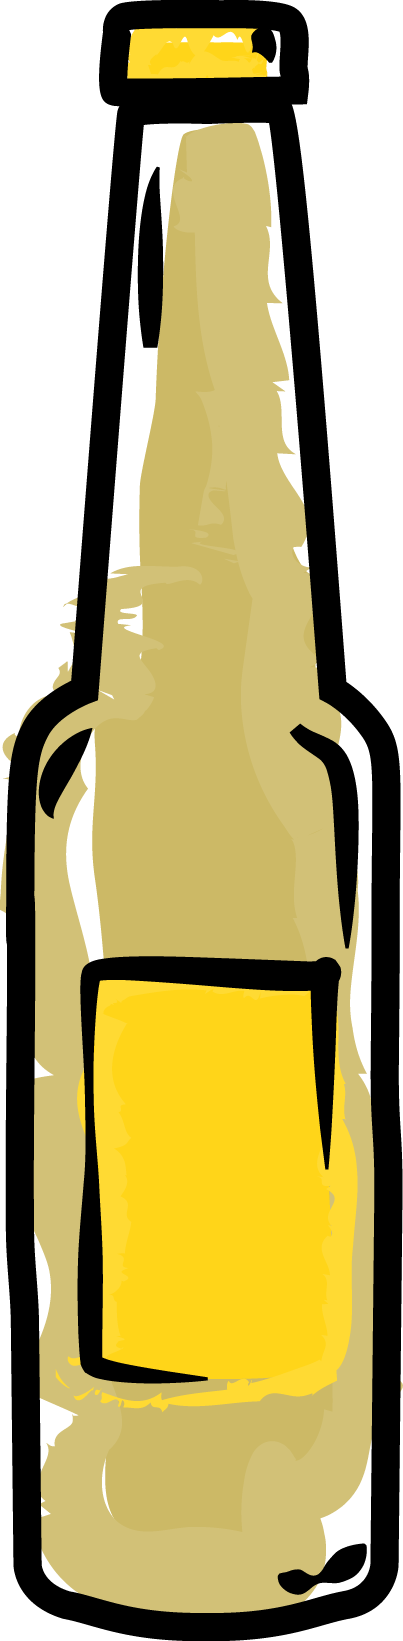 Passo for easy mix. Clipart beer ginger beer